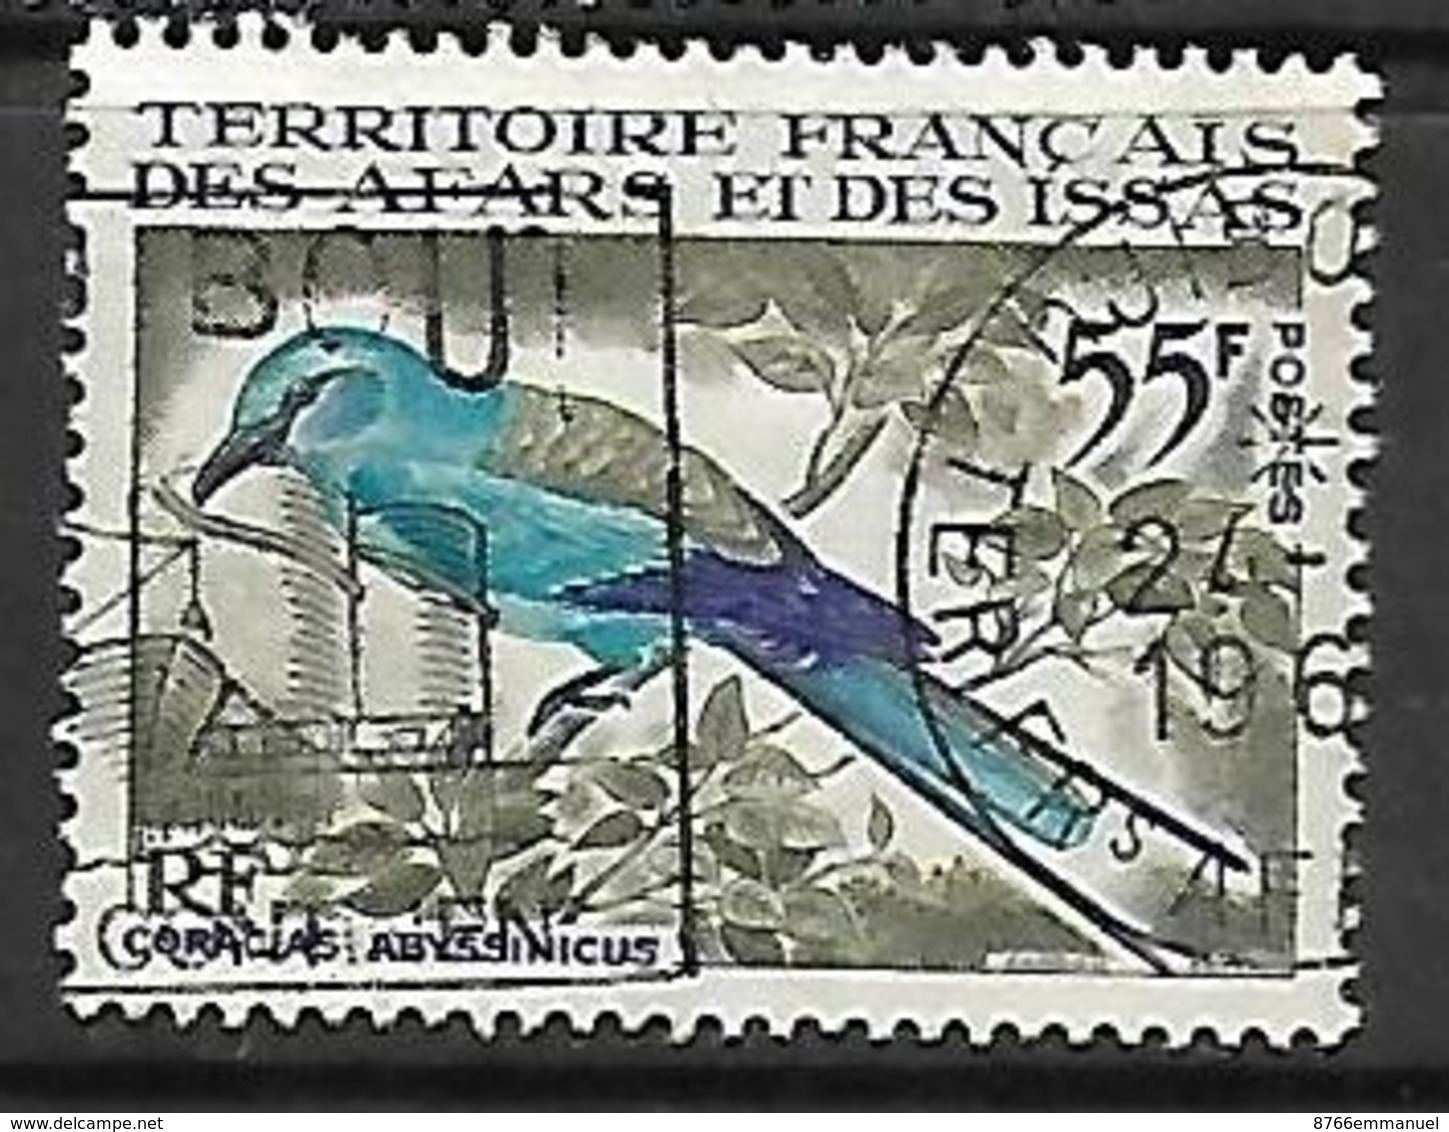 AFARS ET ISSAS N°332 - Used Stamps